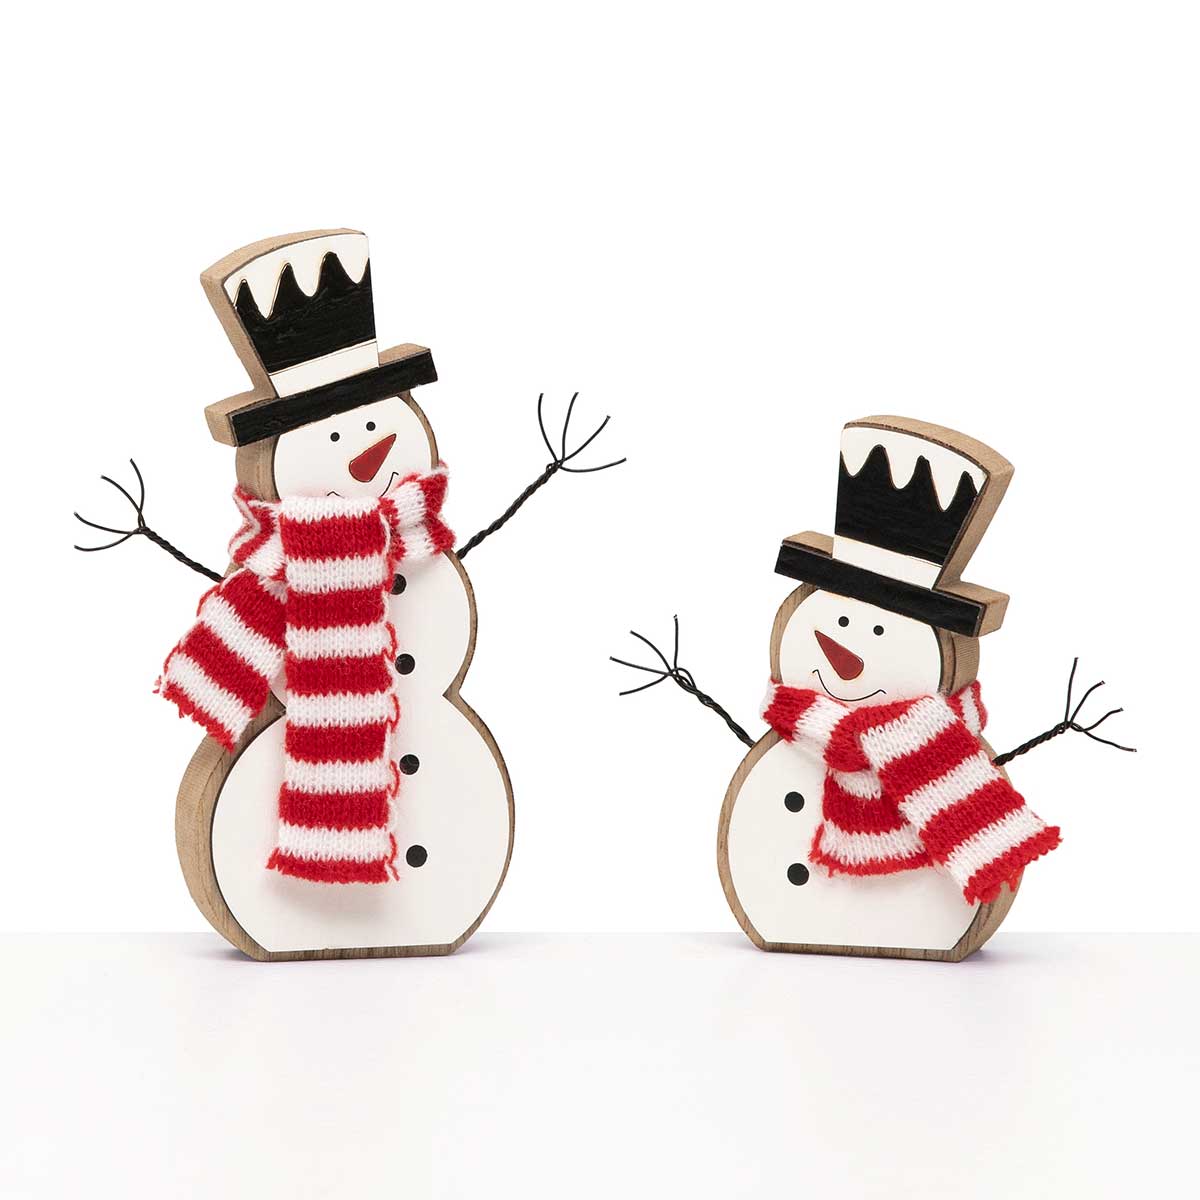 SIT-A-BOUT SNOWMAN SMALL 4.5IN X 1IN X 4.5IN WHITE/RED/BLACK - Click Image to Close